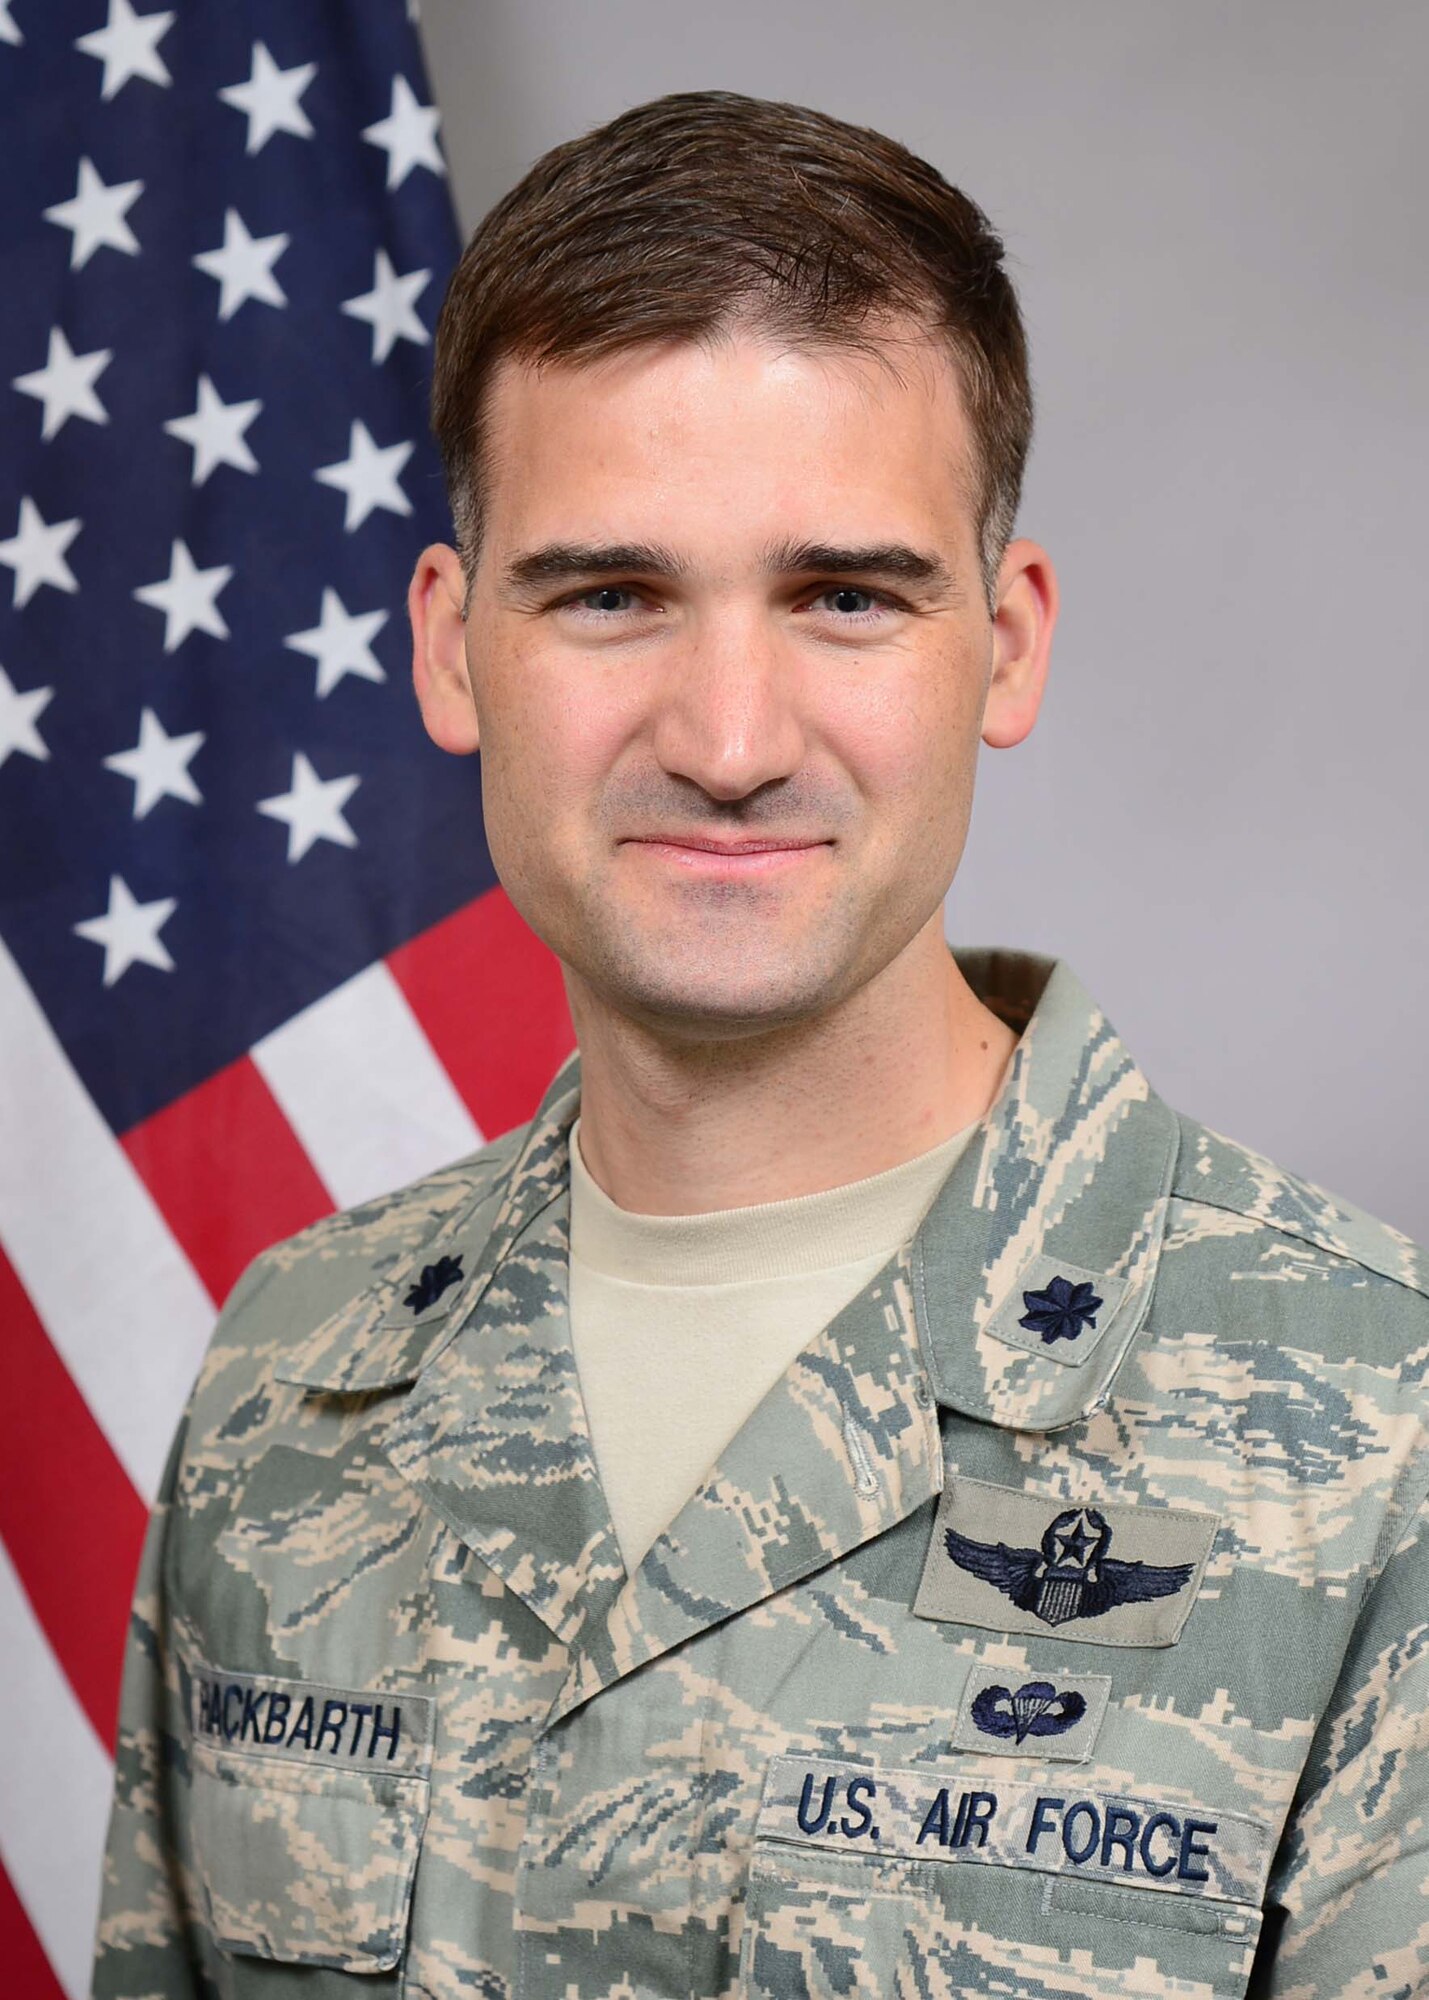 Deployed photograph of Lt. Col. James Hackbarth. (U.S. Air Force photo by Staff Sgt. Jeremy Bowcock)